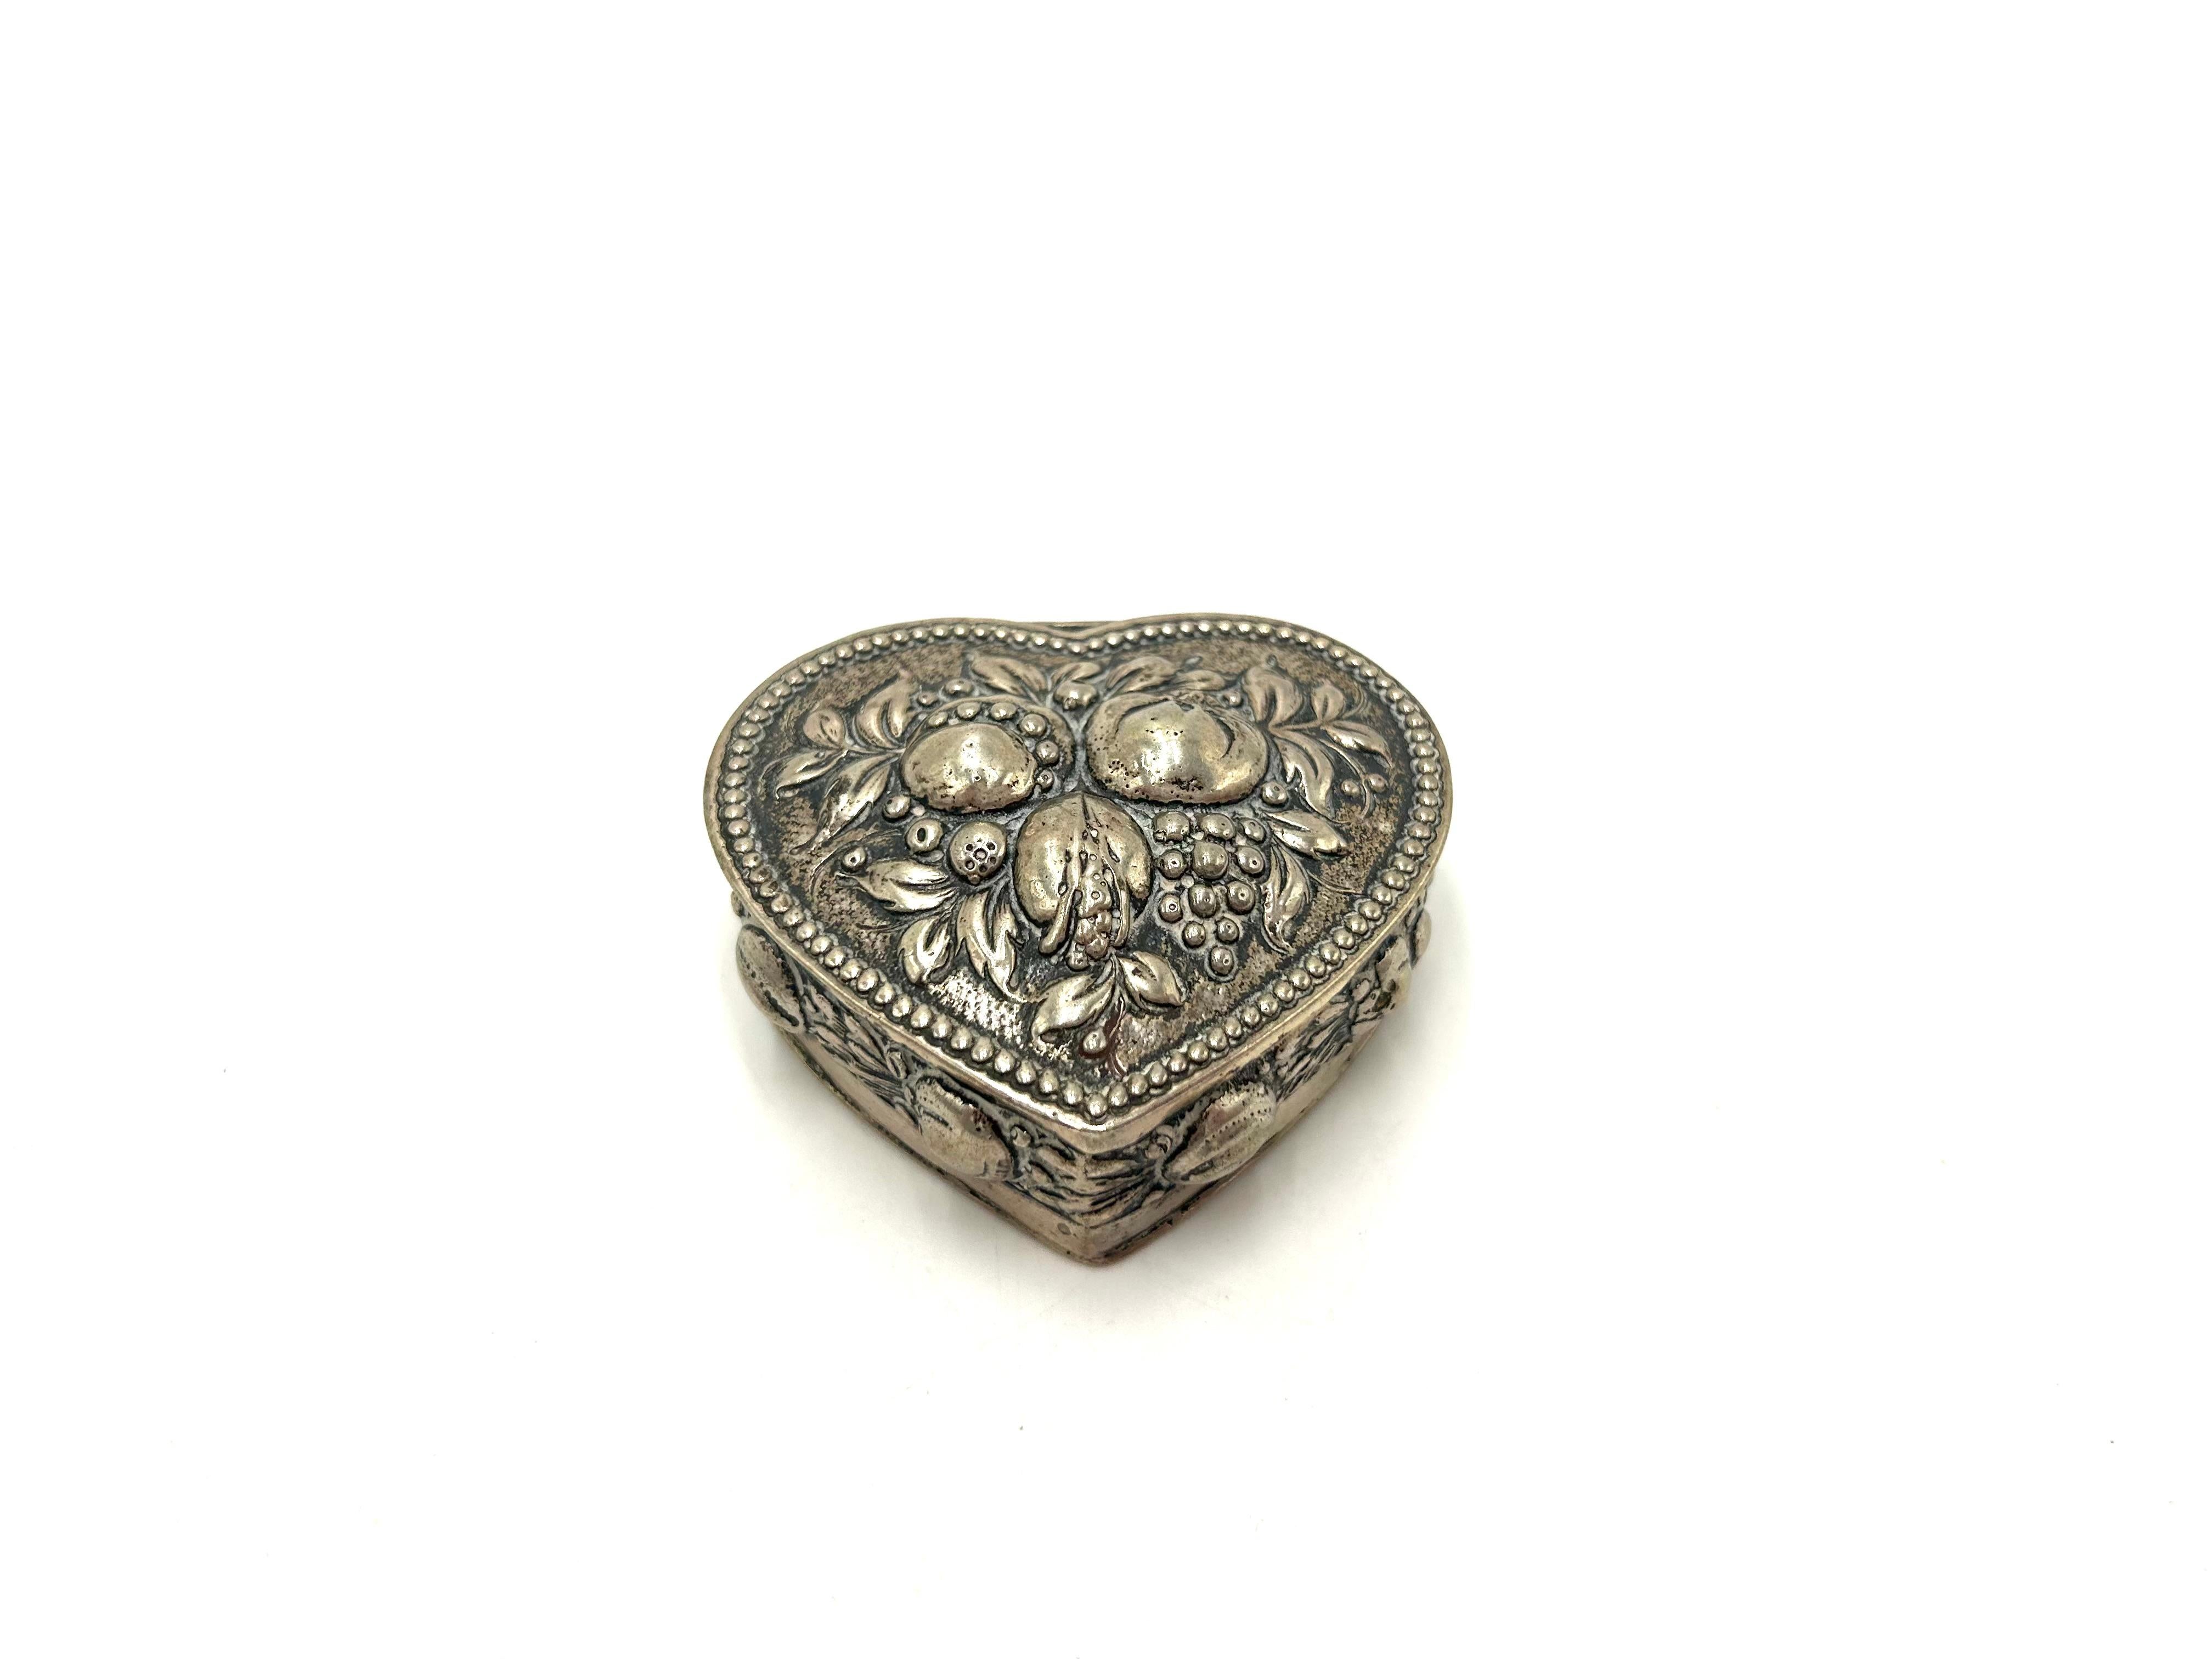 Silver heart-shaped box - perfect gift for beloved ones, wedding, anniversary gift
Silver probe 830
Manufactured in Scandinavia in circa 1920s.
Very good condition.
dimensions: width 7 cm, height 3 cm.